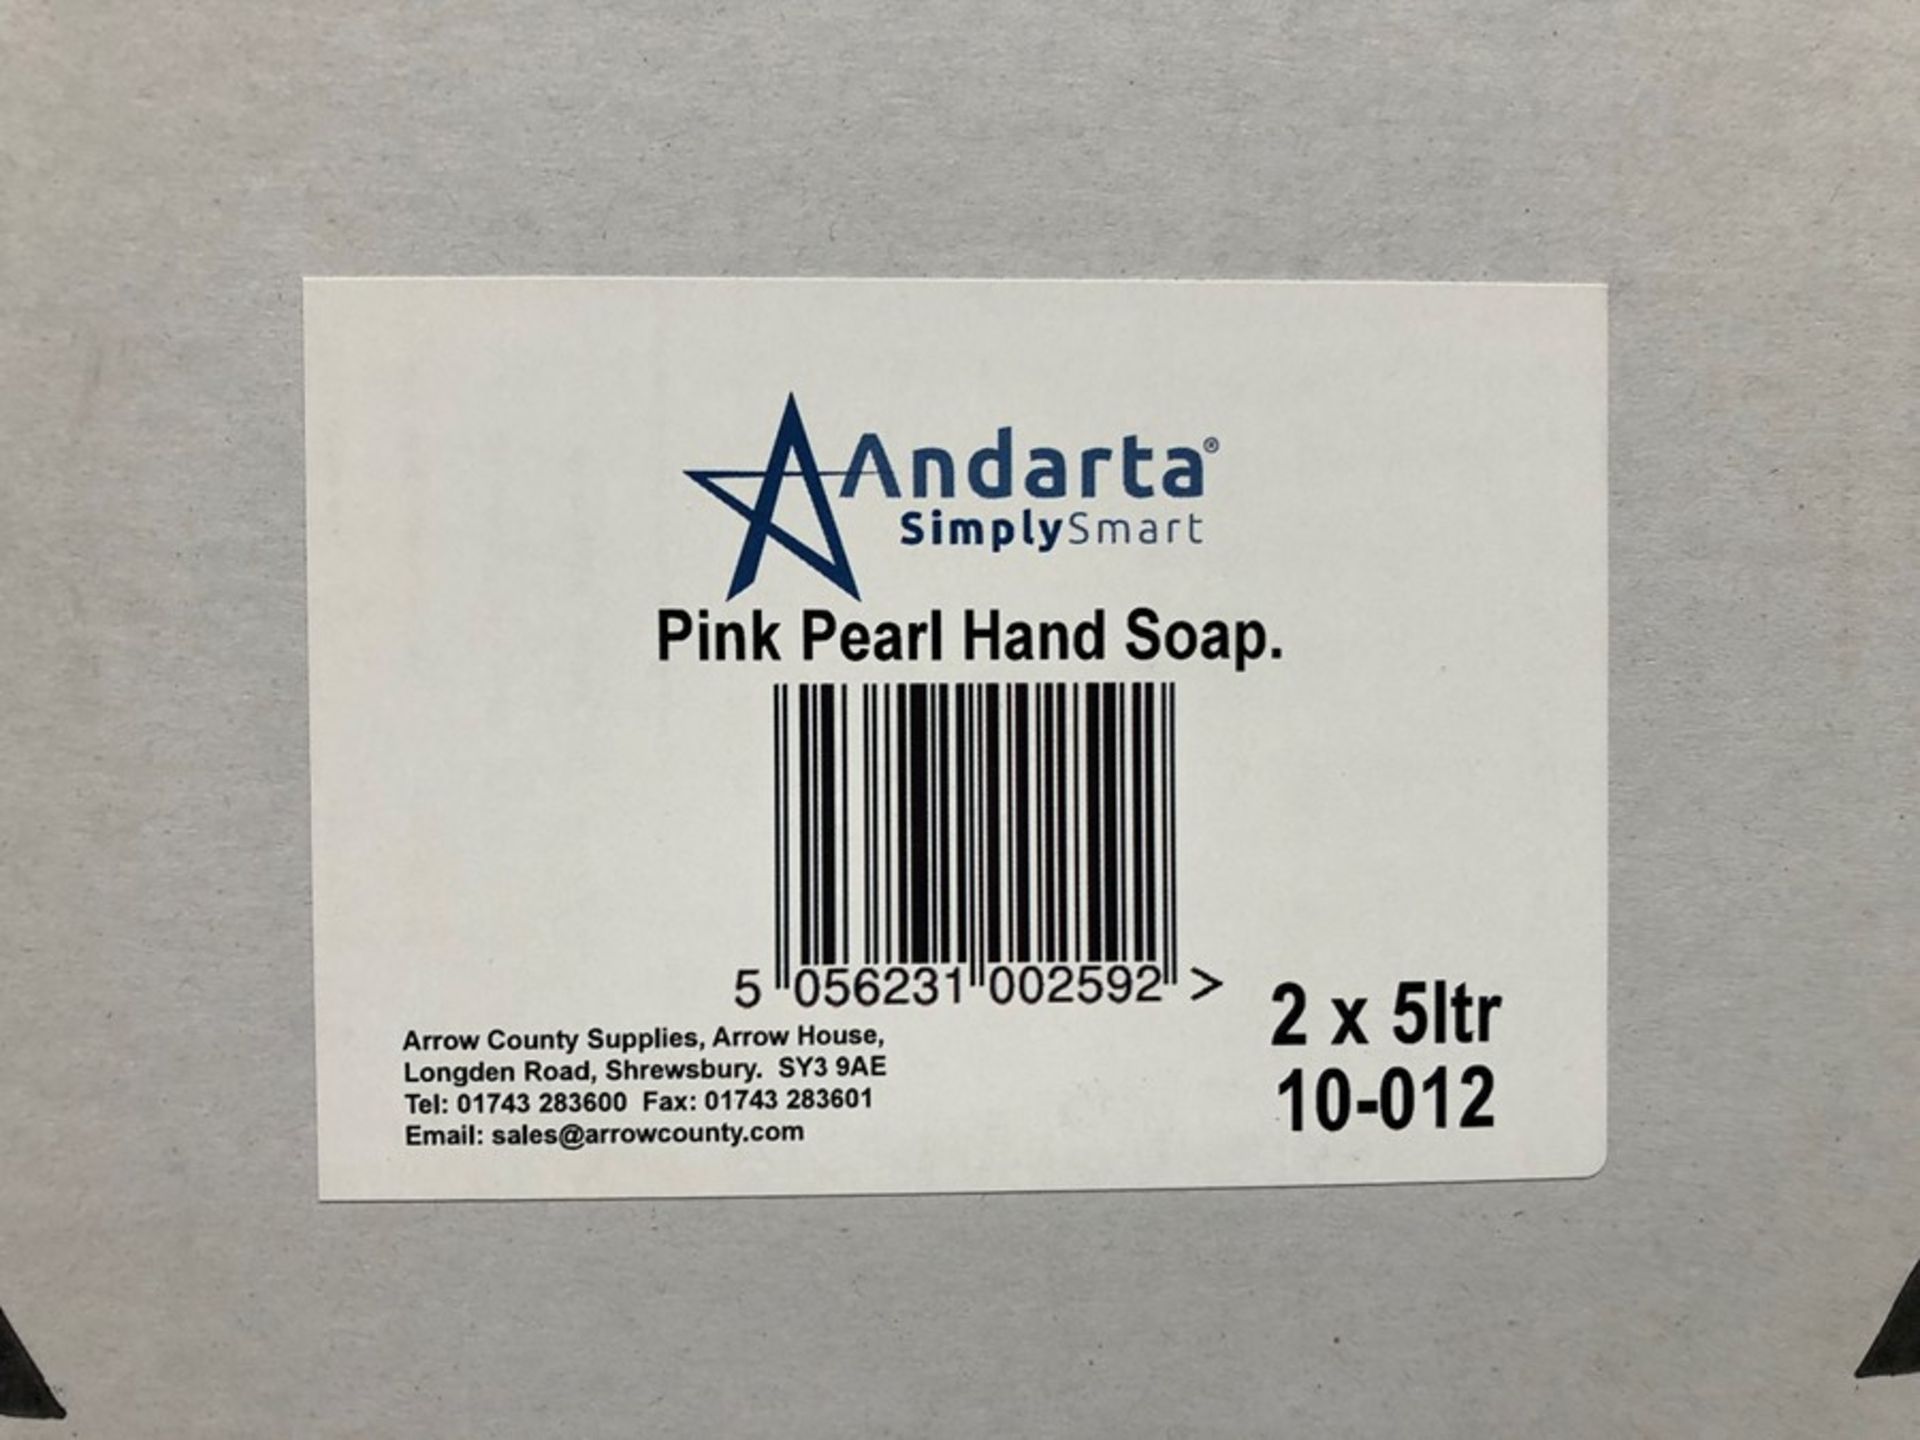 1 LOT TO CONTAIN 4 BOXES OF ANDARTA PINK PEARL HAND SOAP - EACH BOX 2 X 5L BOTTLES